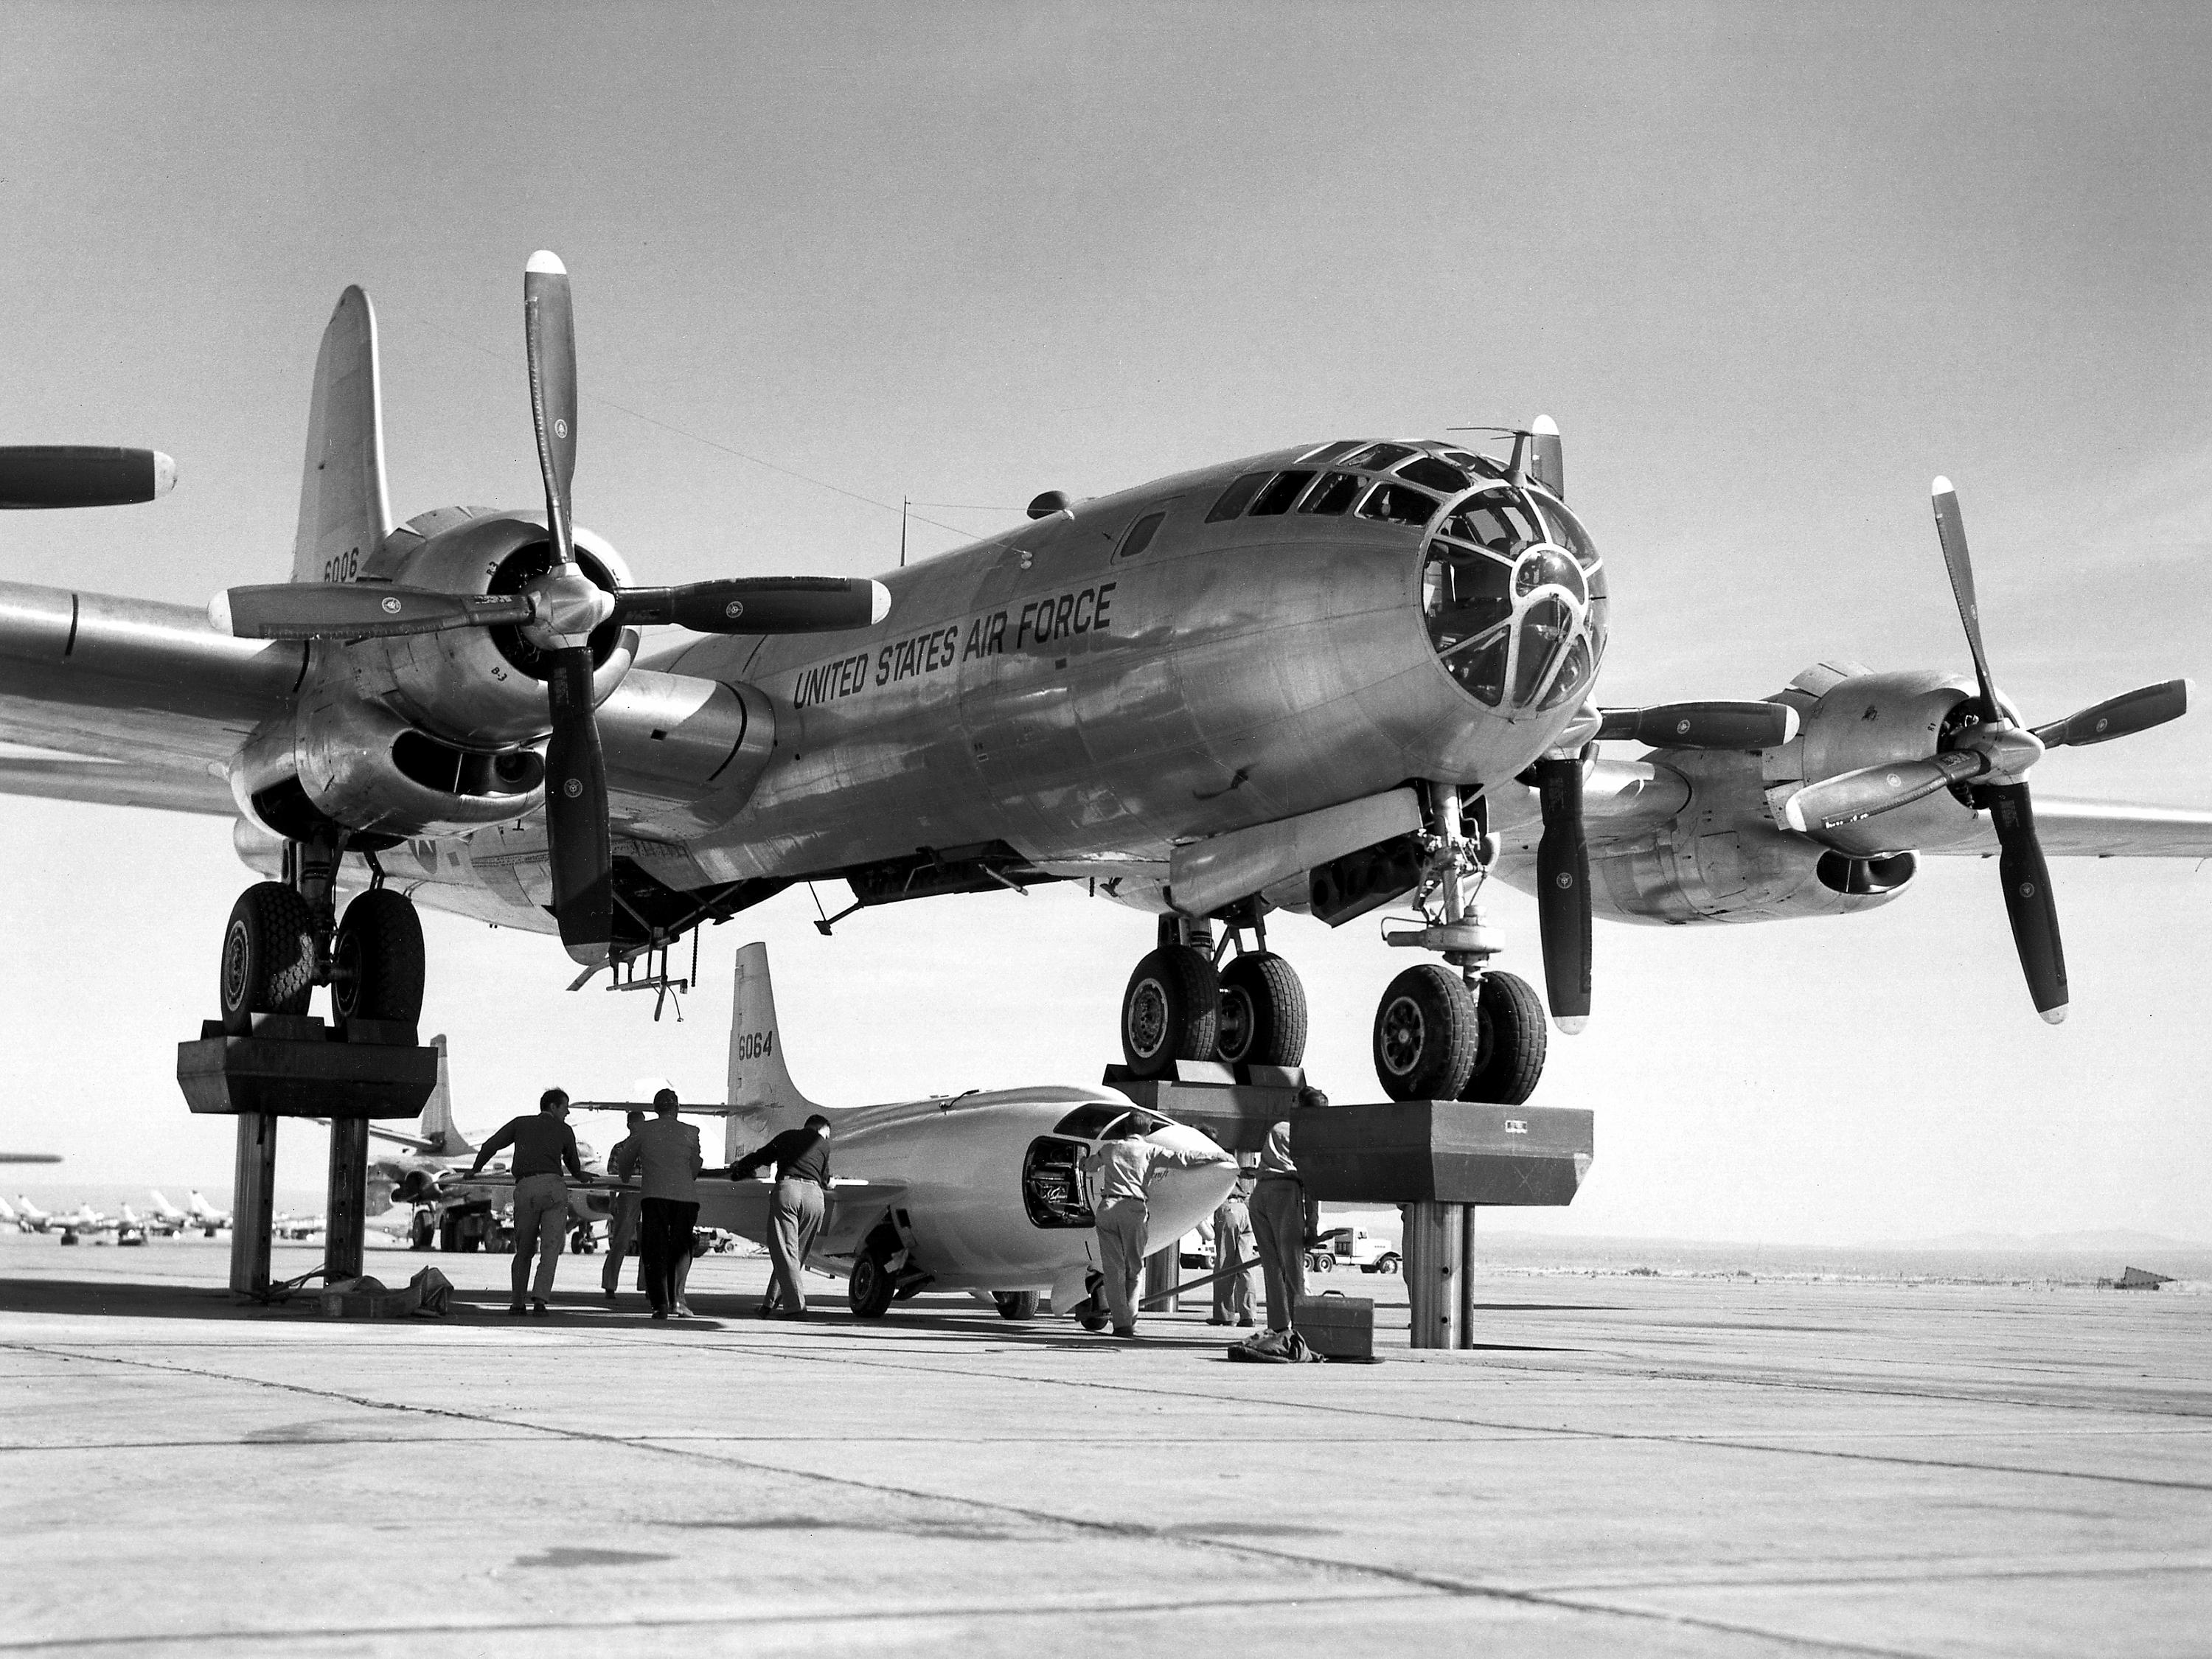 B-50 Superfortress: The Cold War U.S. Air Force's Idea of a Hot